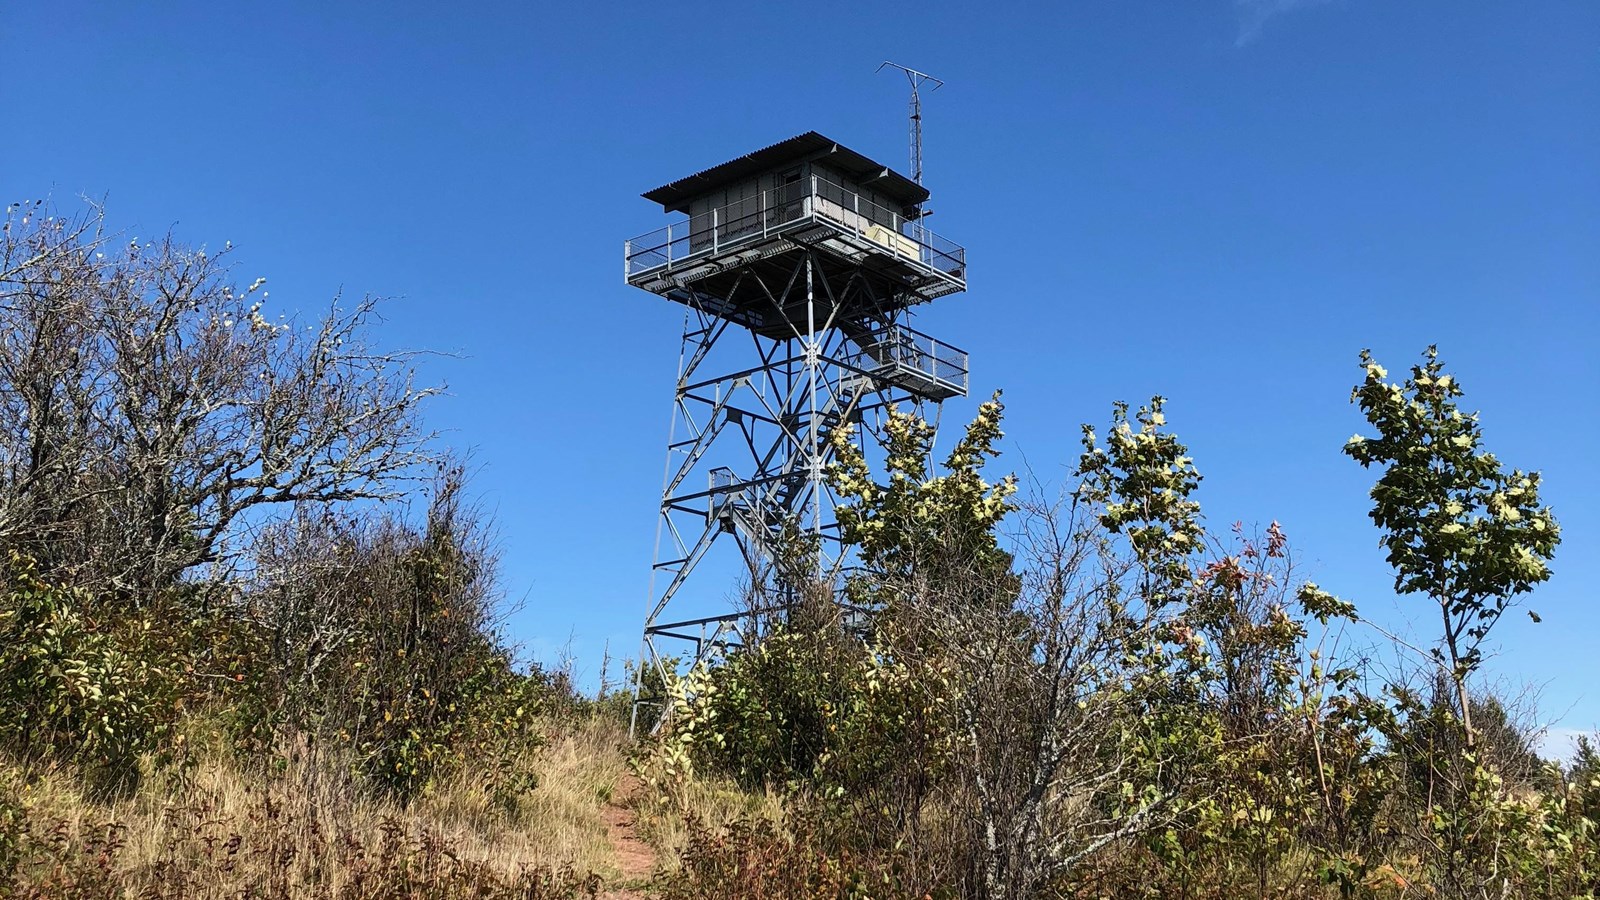 Fire tower stands in tall grass surrounded by trees. 